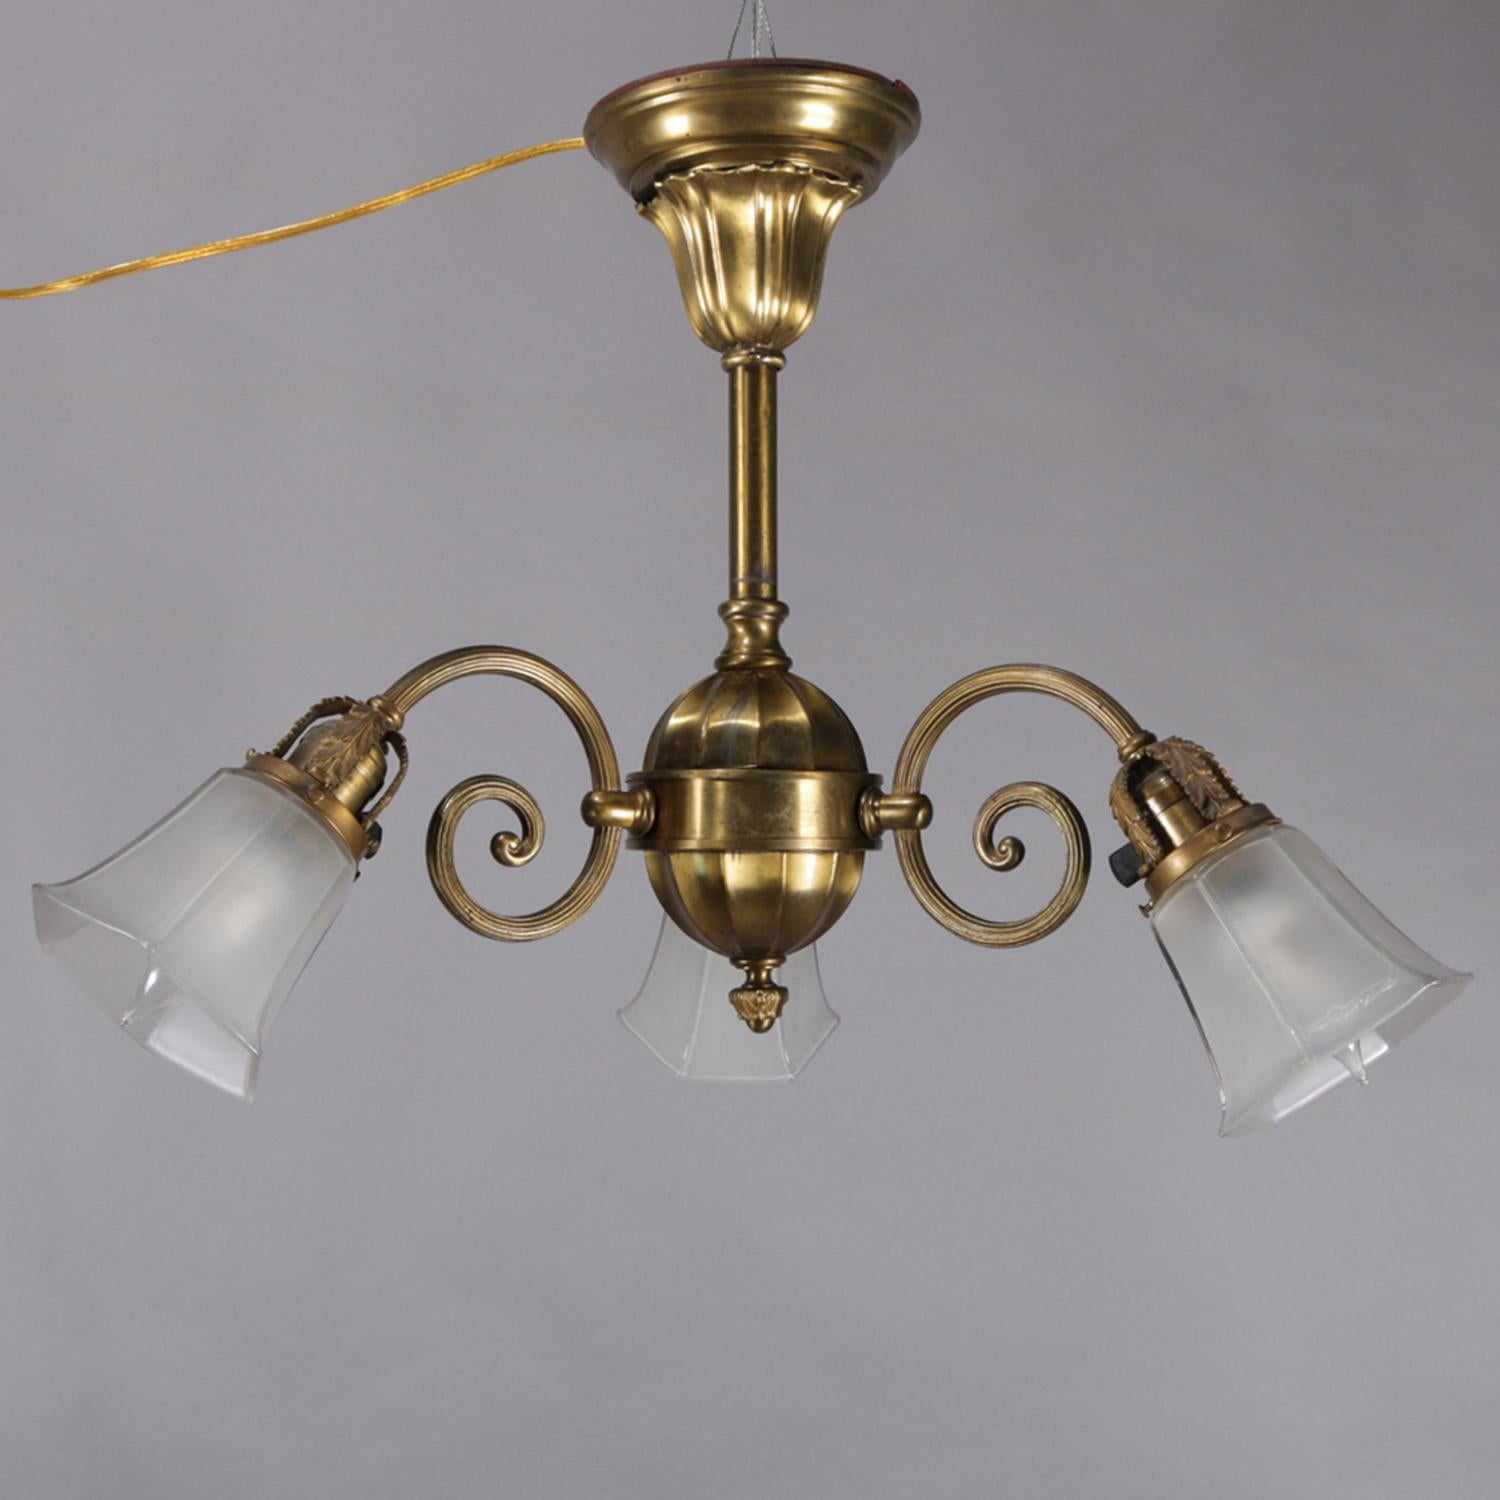 A vintage branch chandelier features brass frame with column terminating in faceted pendant and having three scroll arms with lights having frosted glass shades, circa 1920

Measures: 19.5